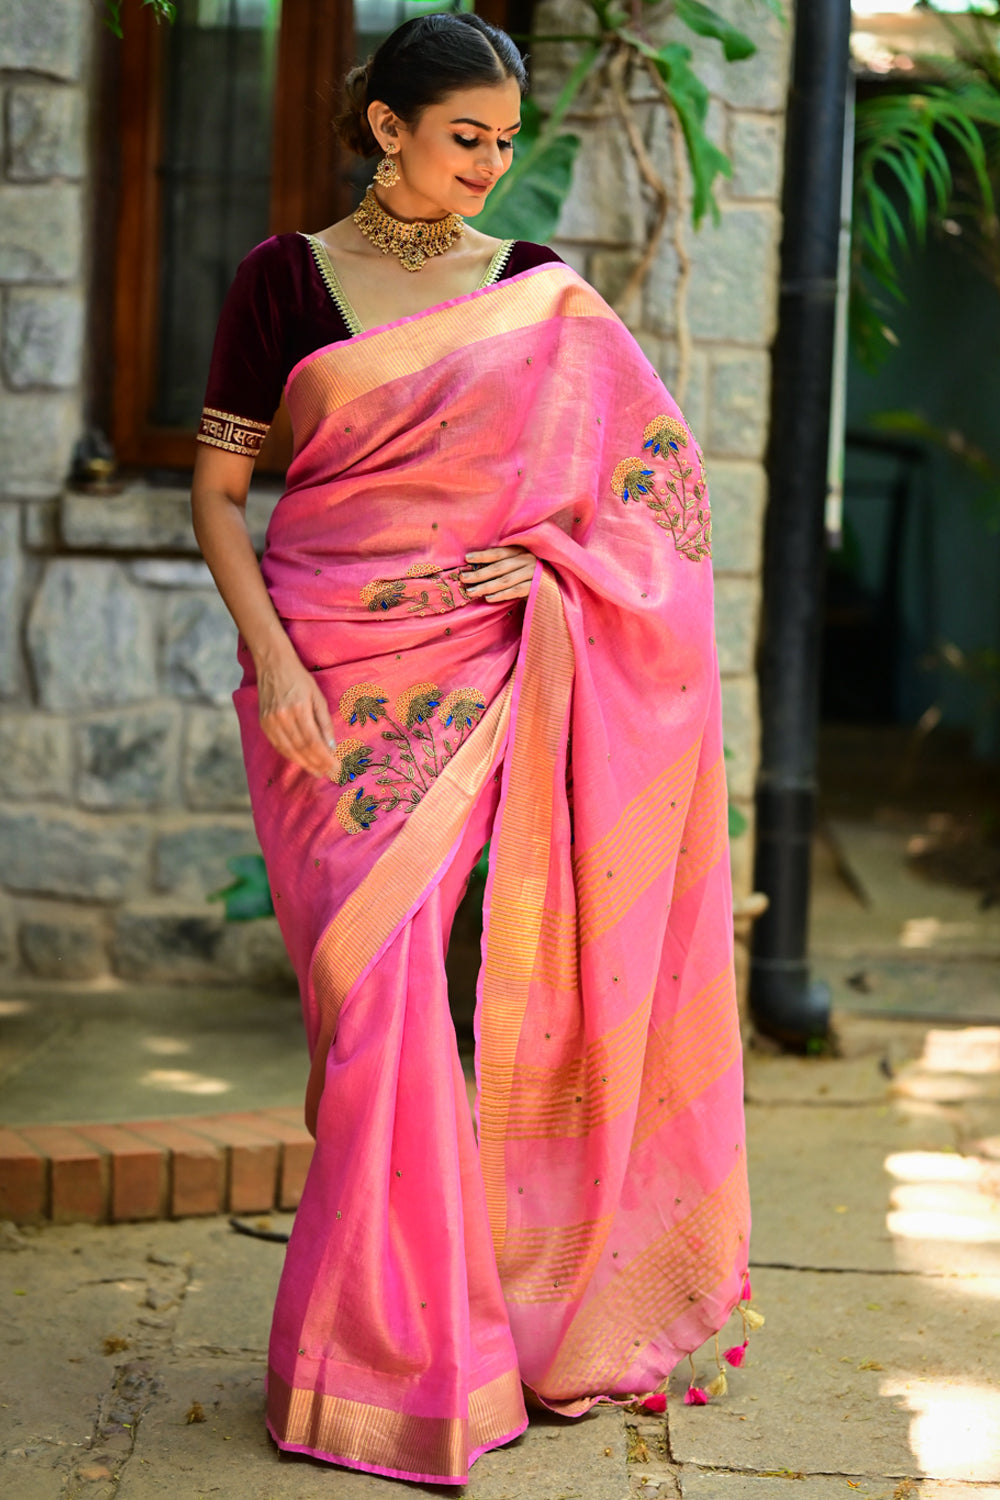 Bead and embroidery handwork on Tissue Linen Saree in Pink and Gold Tissue